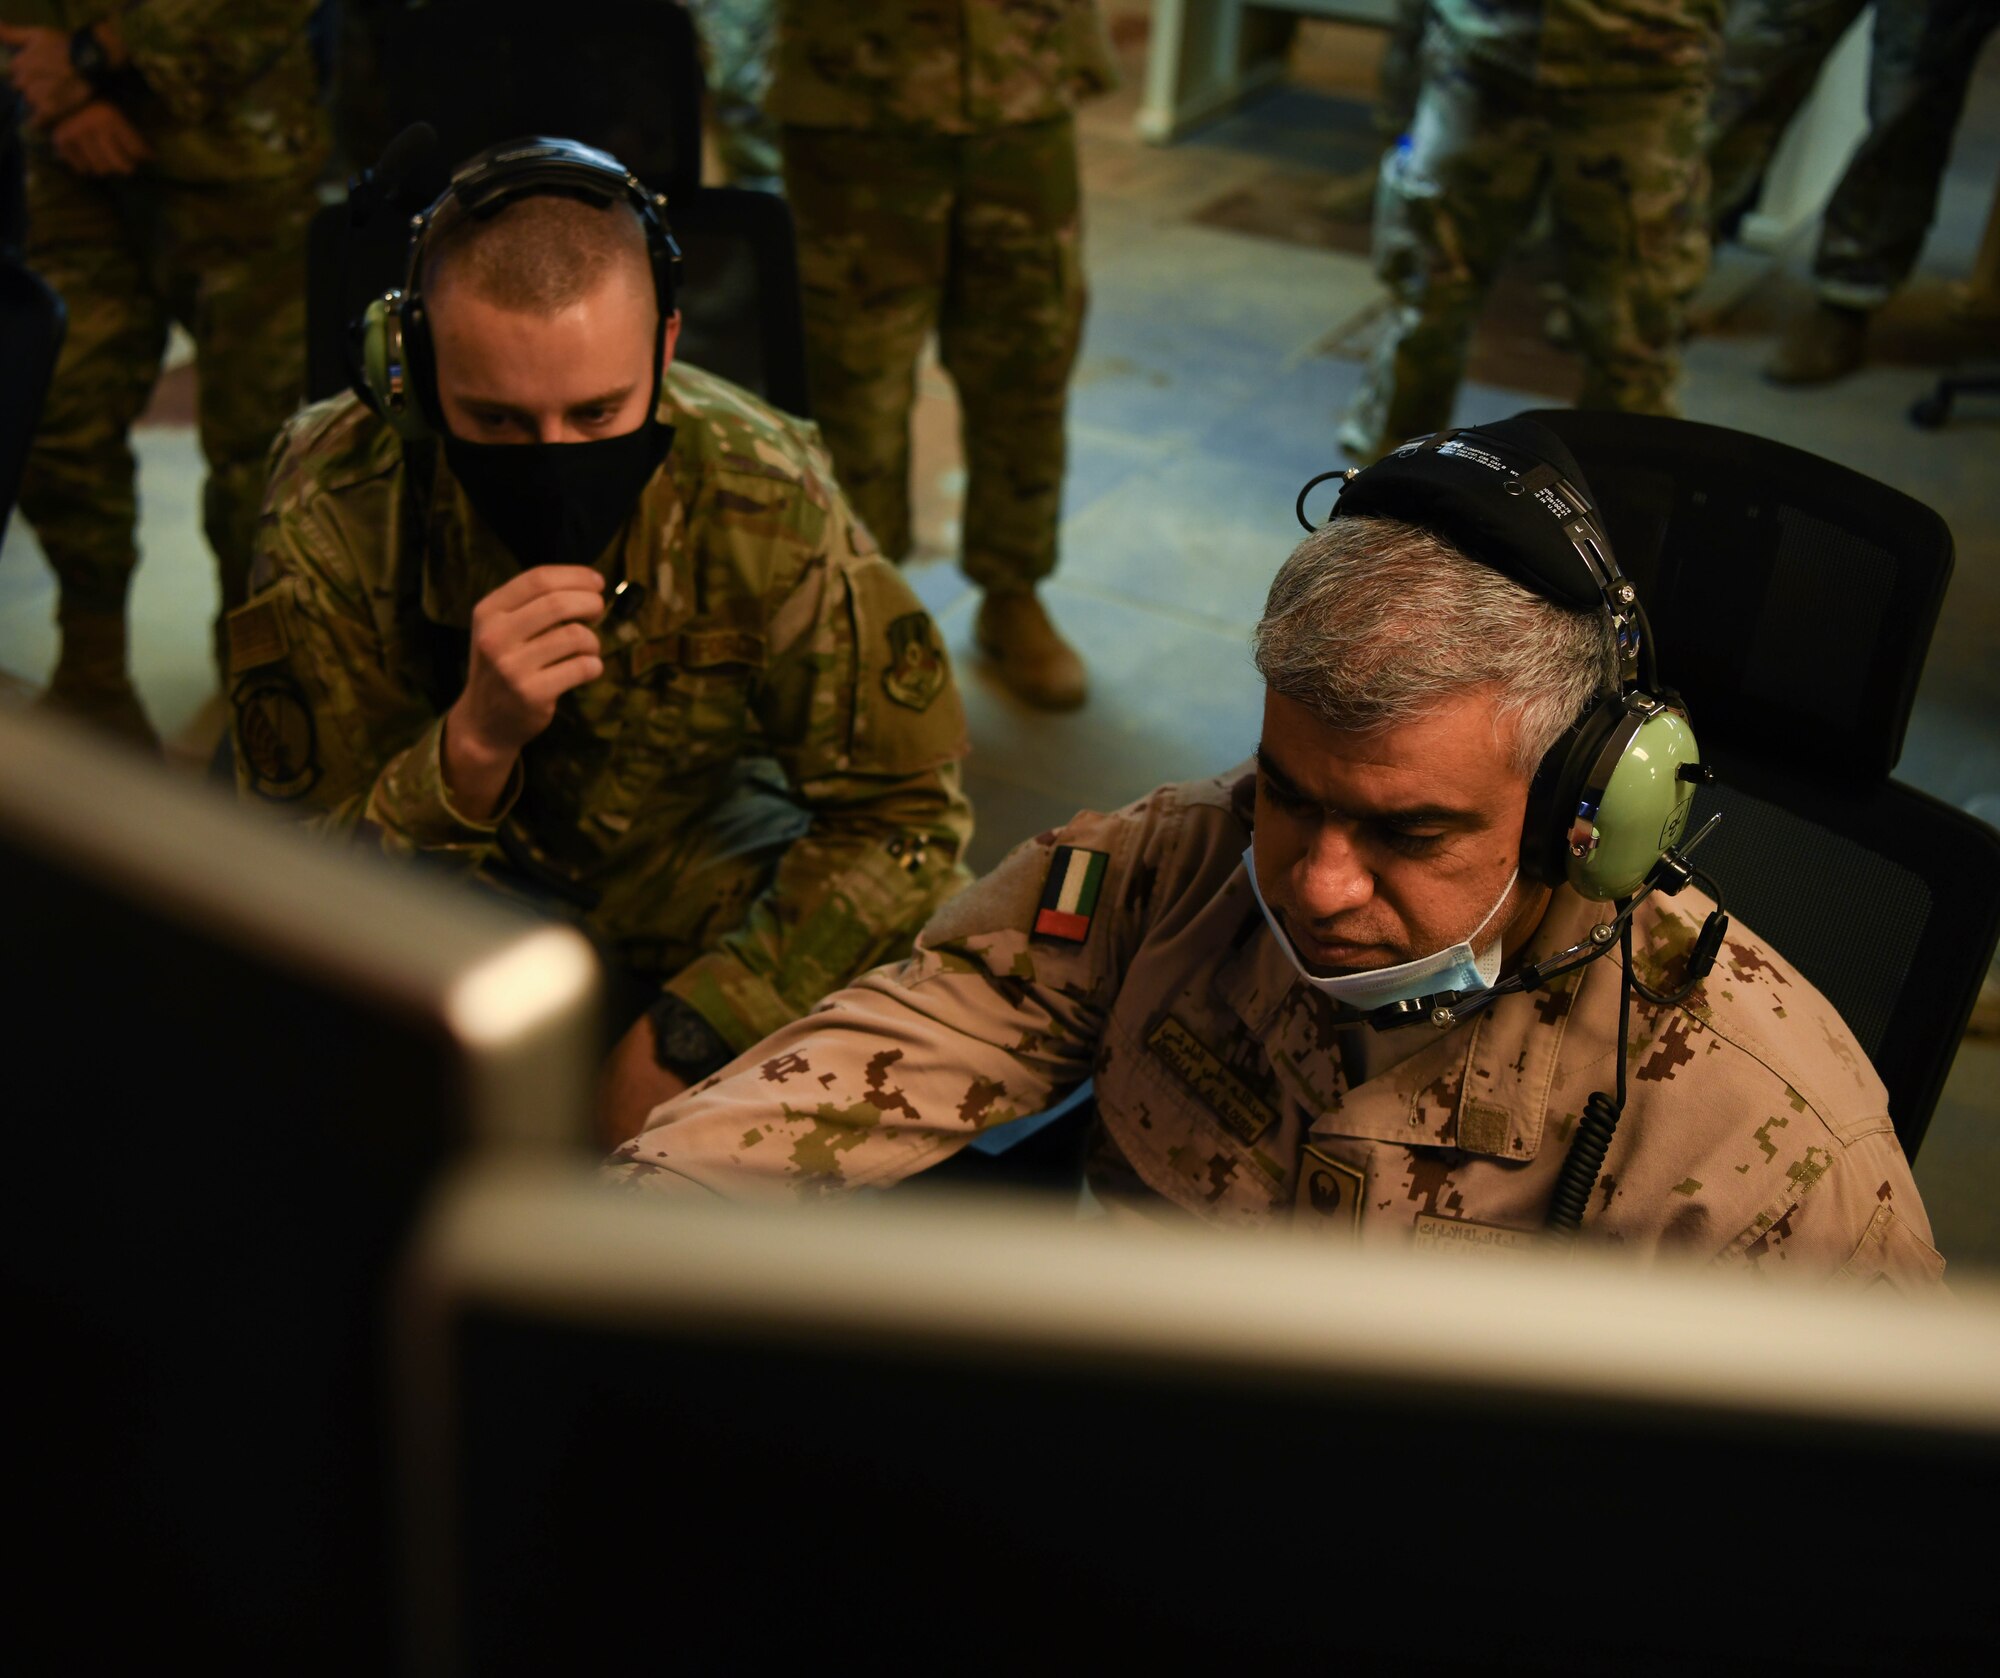 Airman 1st Class Derek Hilton (left), 727th Expeditionary Air Control Squadron weapons director, watches Col. Abdallah Ali Mohamed Al-Bloushi, United Arab Emirates Air Operations Center deputy commander, set up controls during a visit to the 727 EACS headquarters (Kingpin), August 24, 2020, in Al Dhafra Air Base, United Arab Emirates.